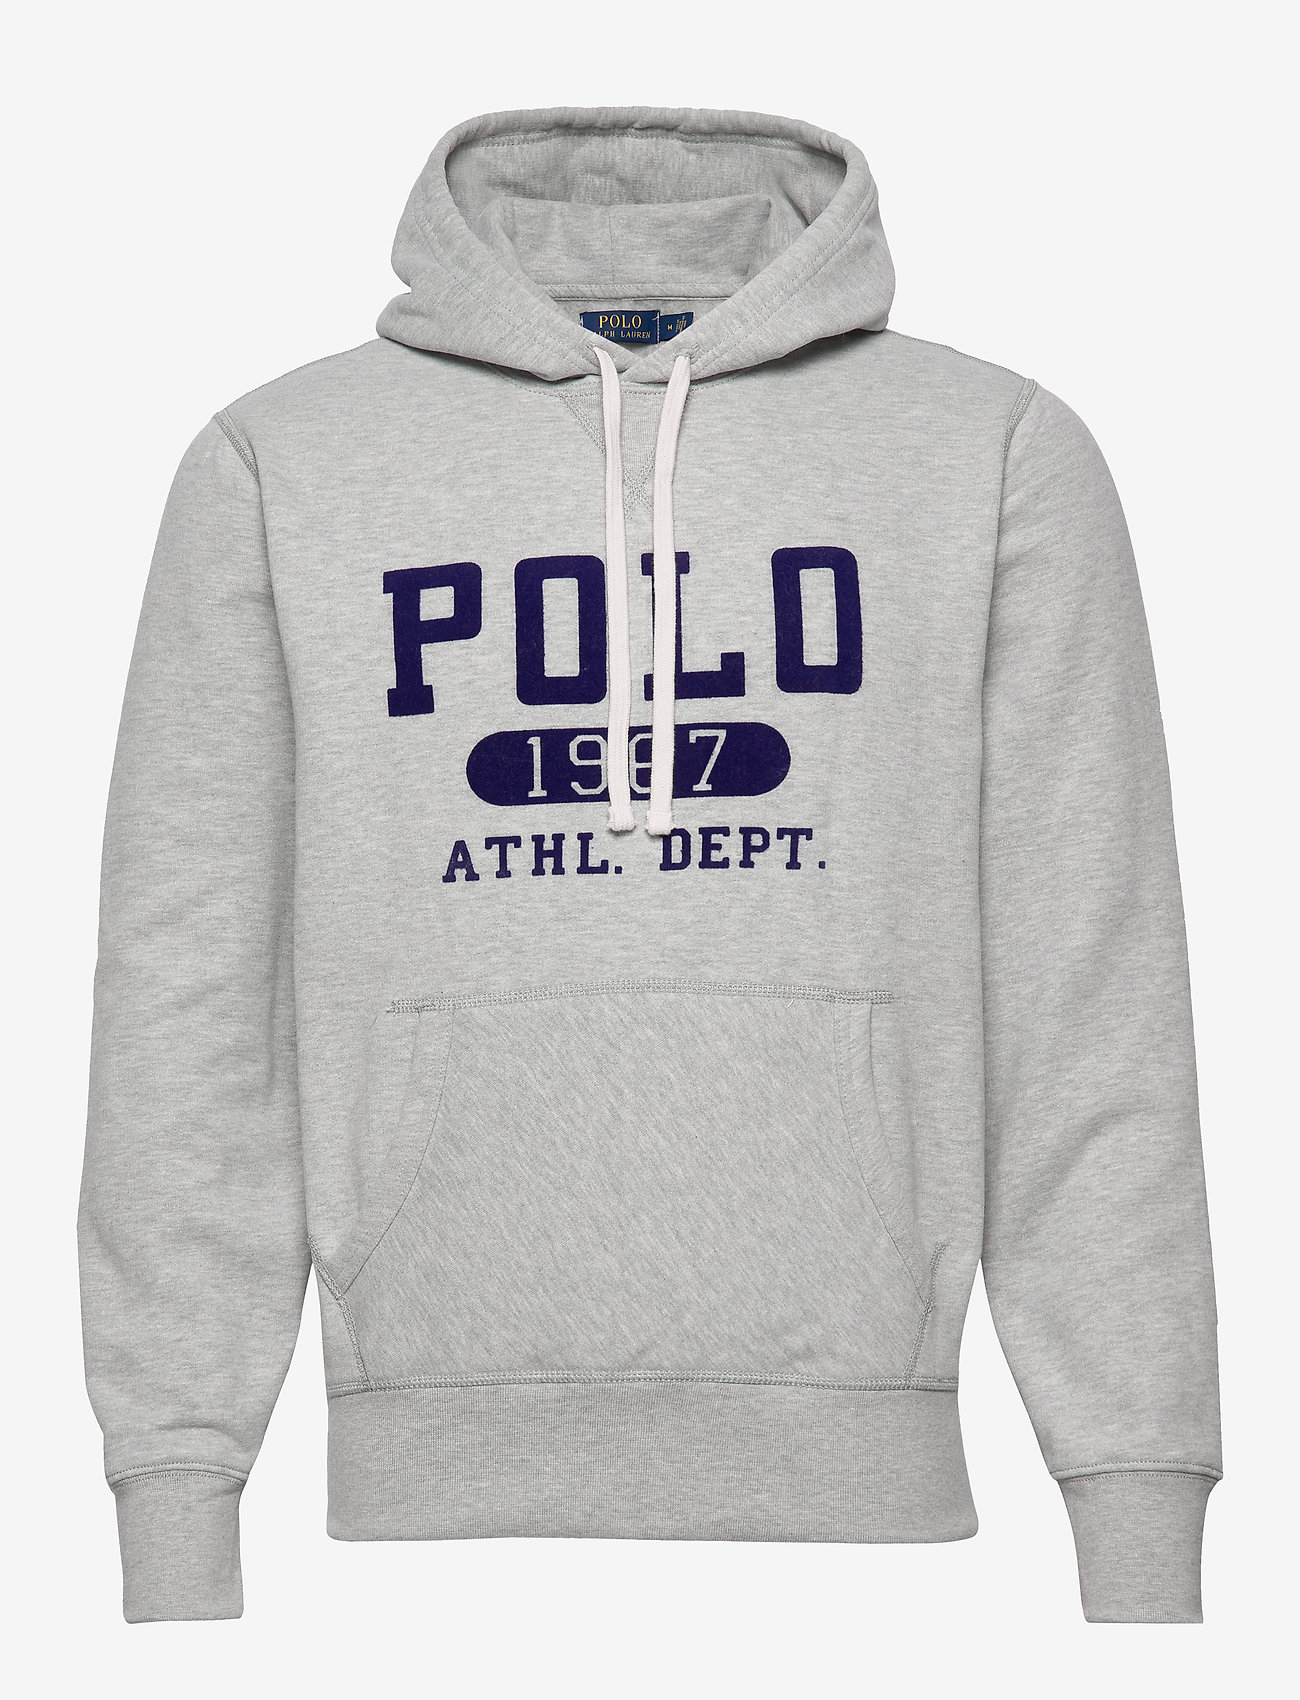 polo graphic hoodie